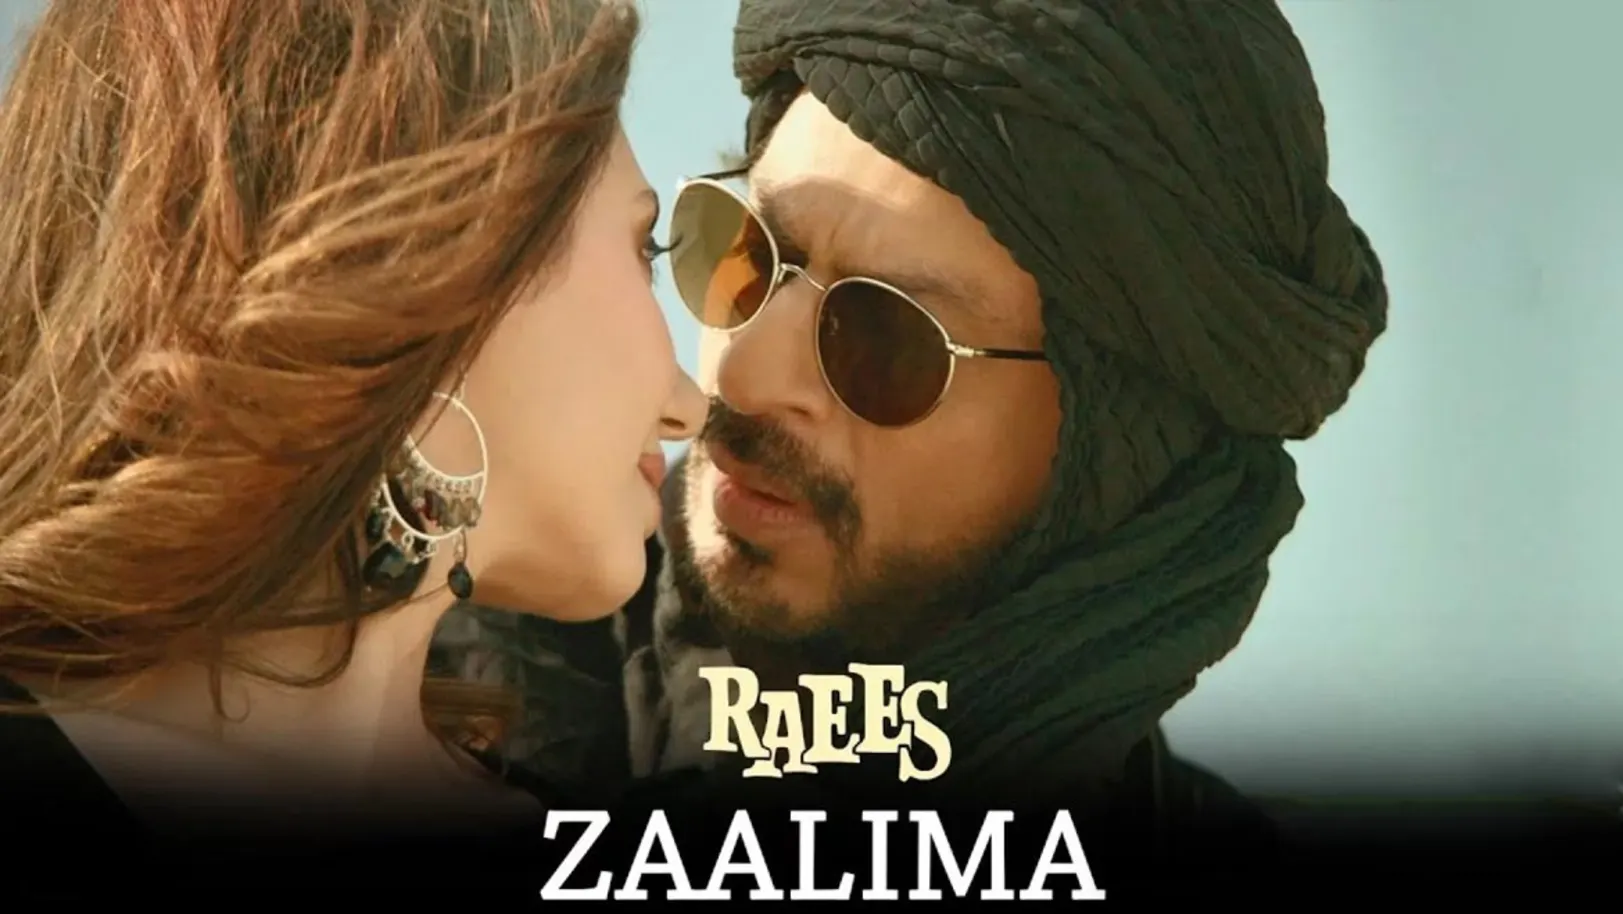 Pakistan's Raees ban is NOT going down well with fans - Comment - Images